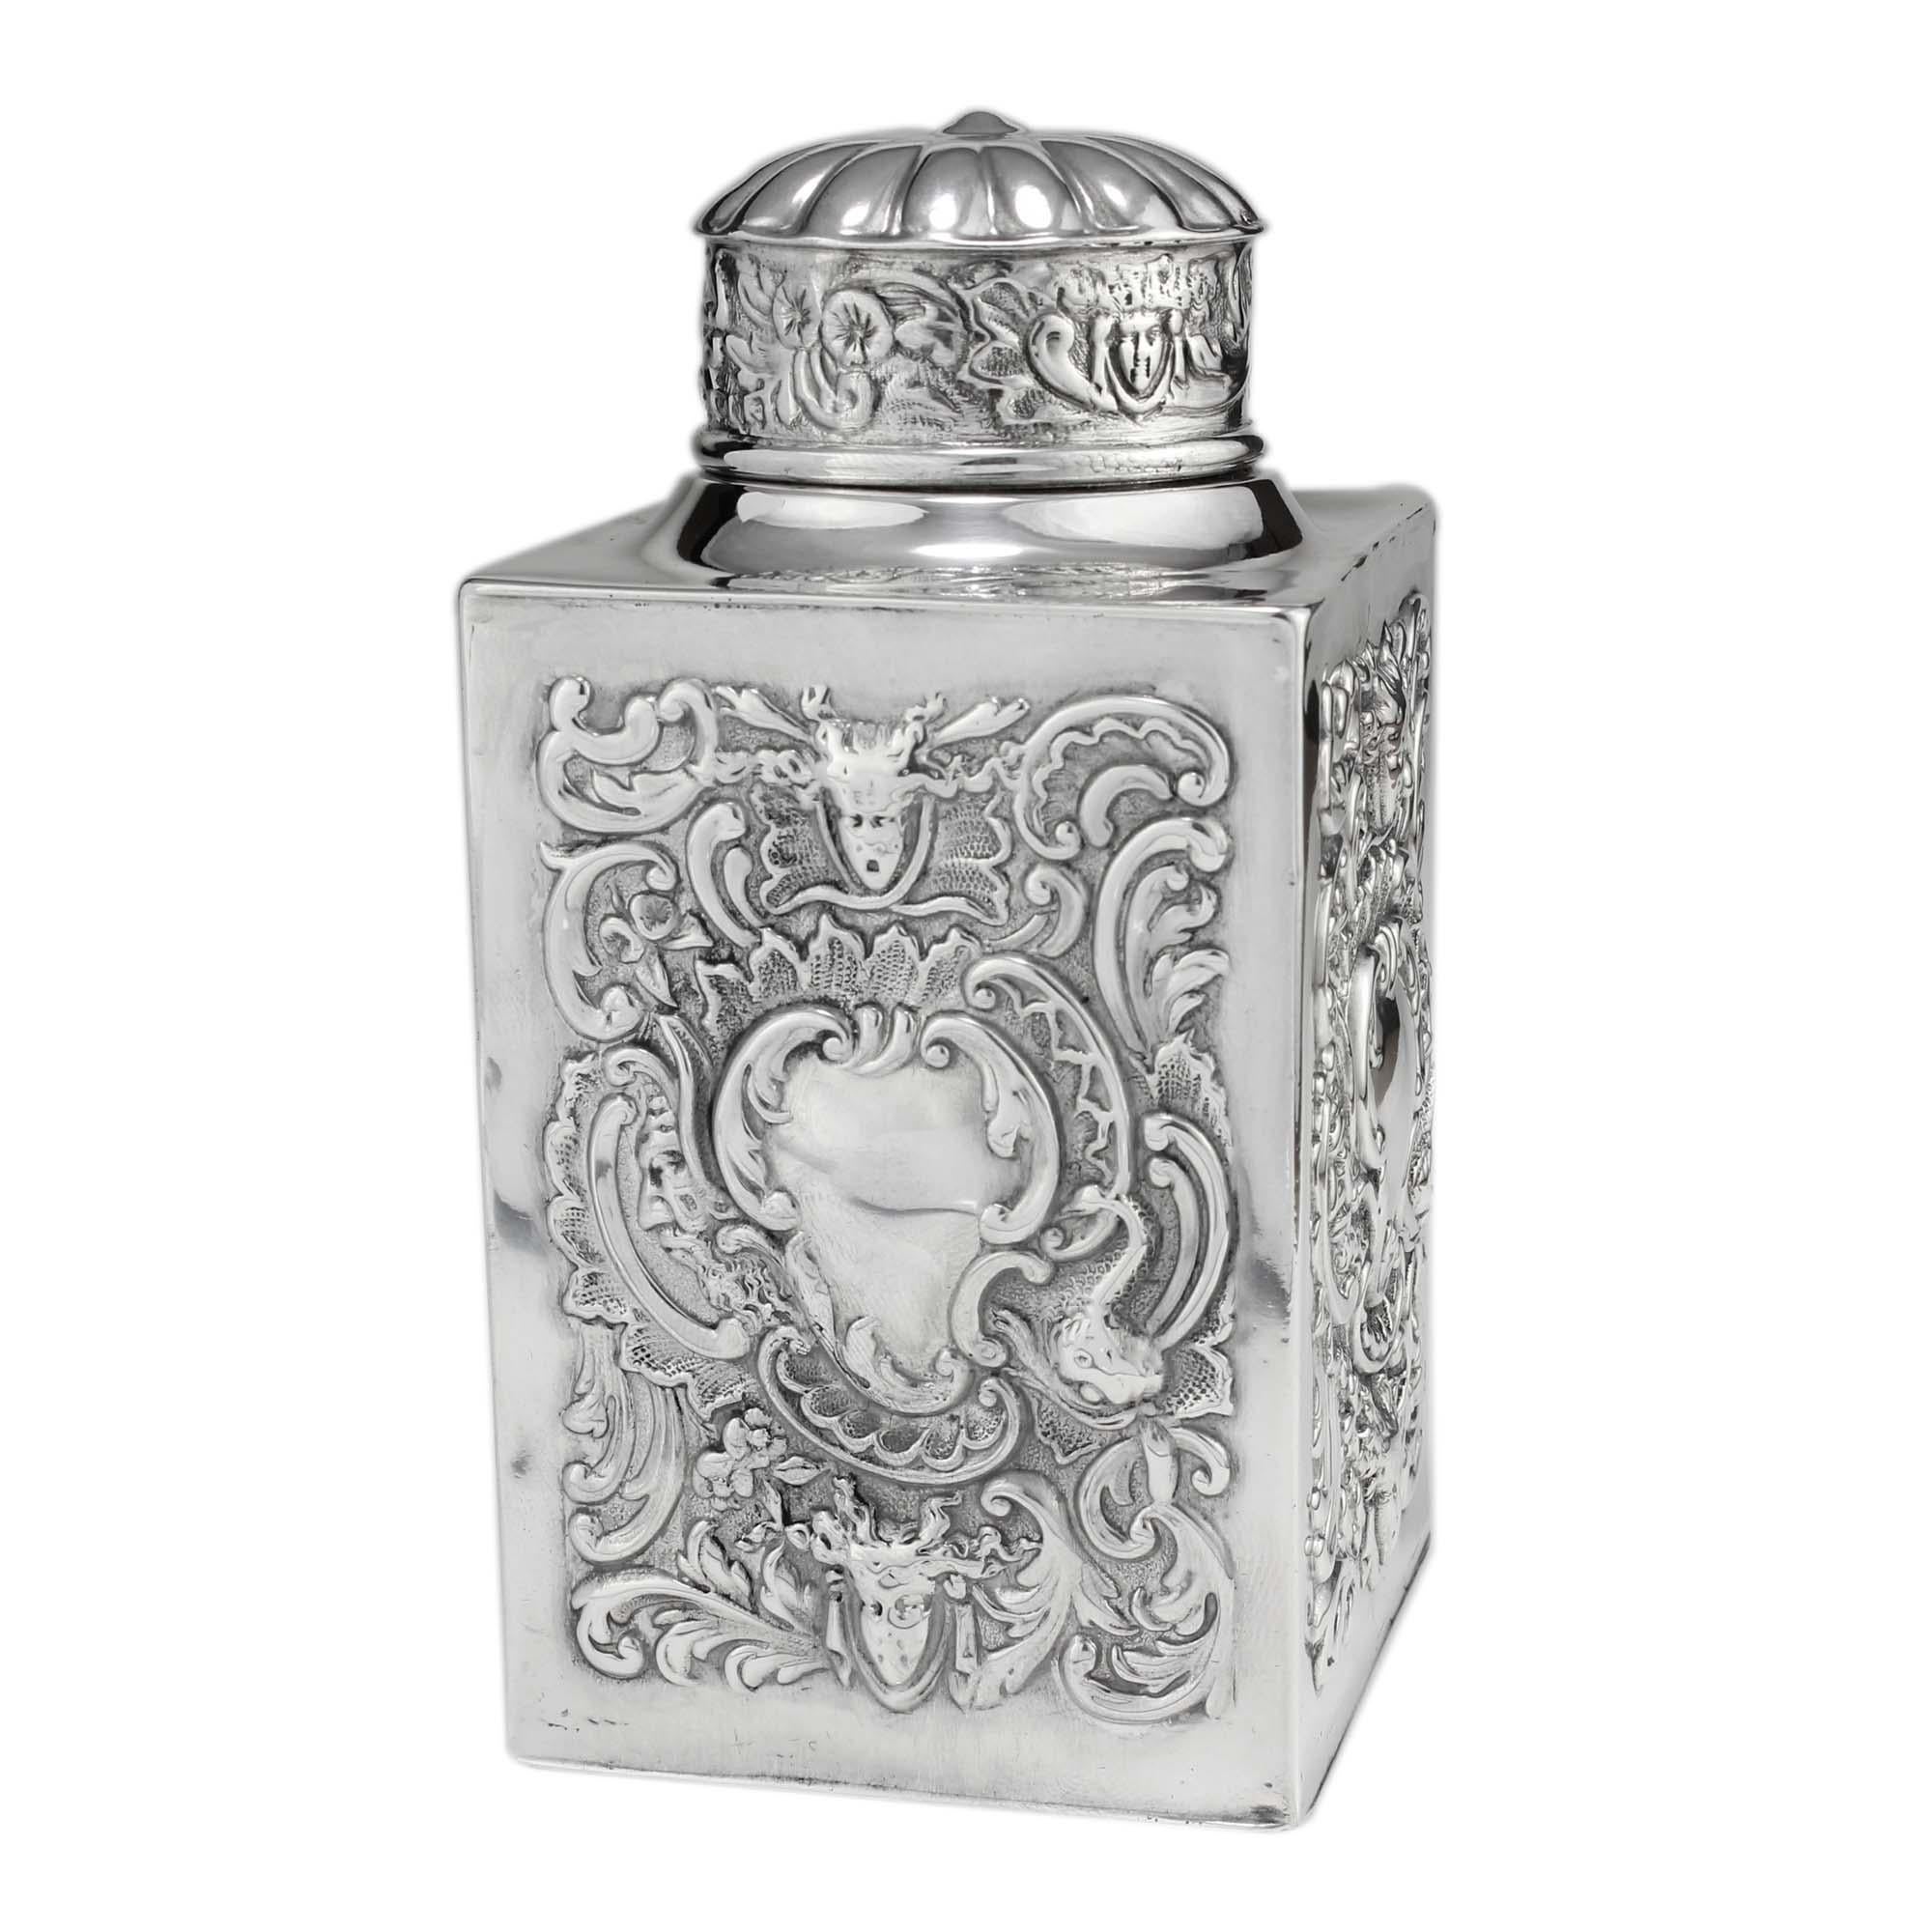 Antique Victorian sterling silver embossed tea caddy decorated with scrolls and vacant cartouches.

Tea caddy has a pull of lid, the box is decorated with embossed scrolls and vacant cartouches from all sides.

Maker: William Comyns & Sons
Made